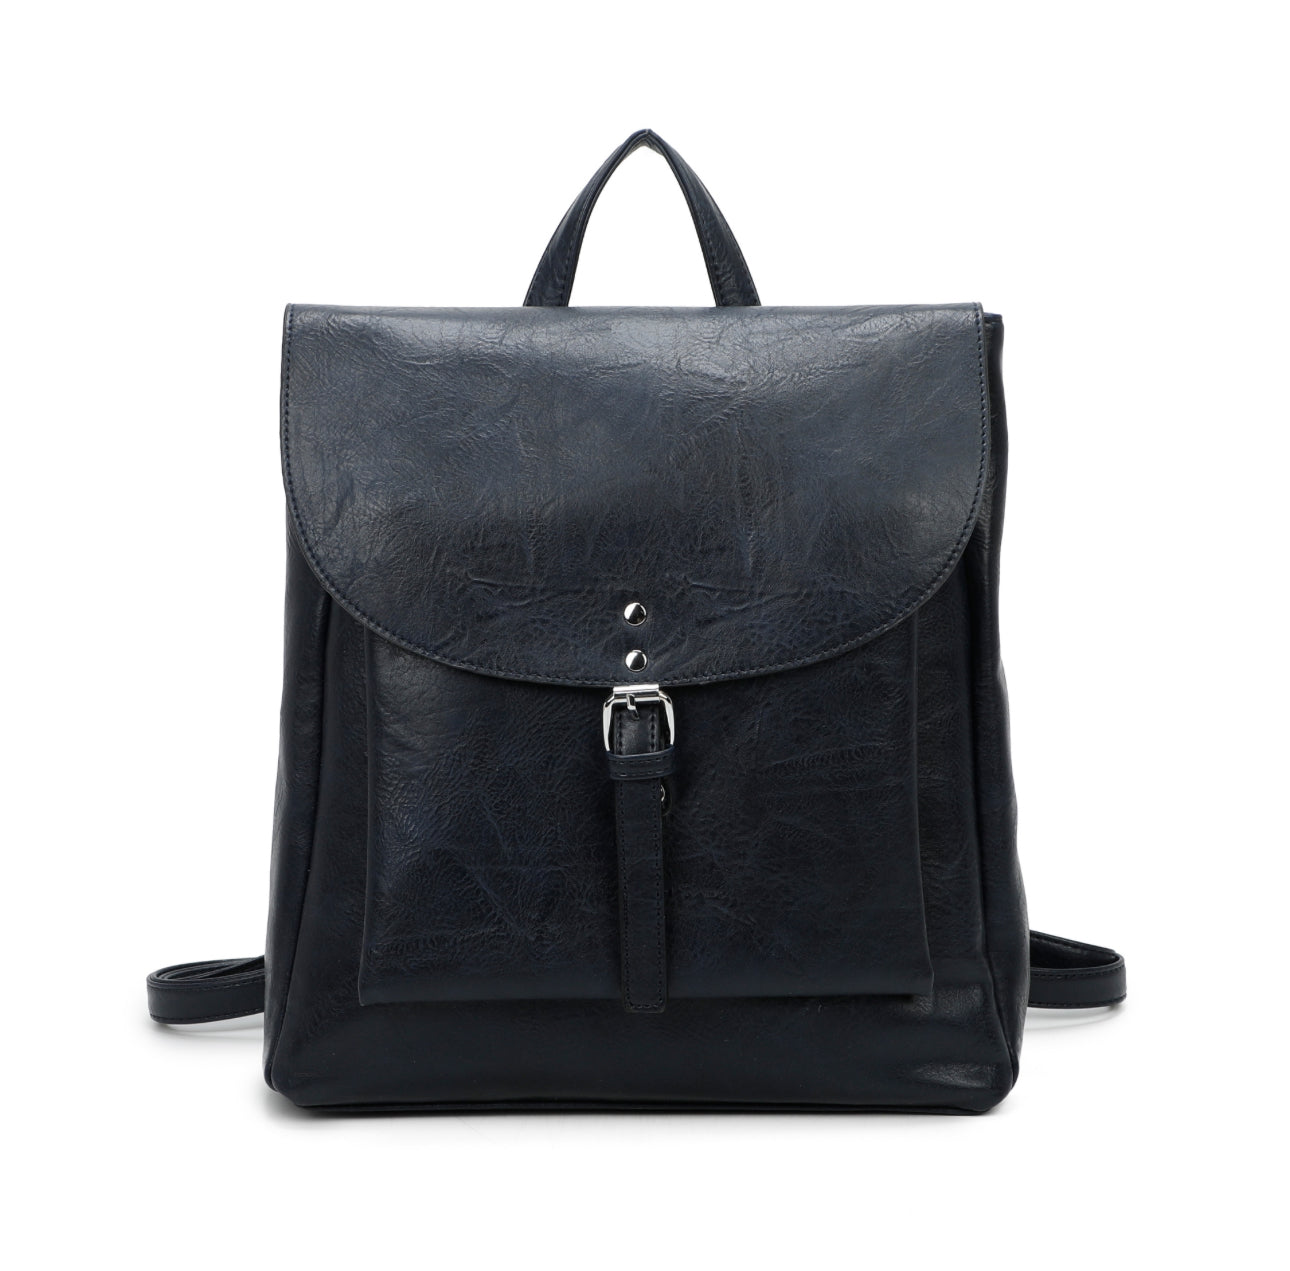 New Backpack 6123